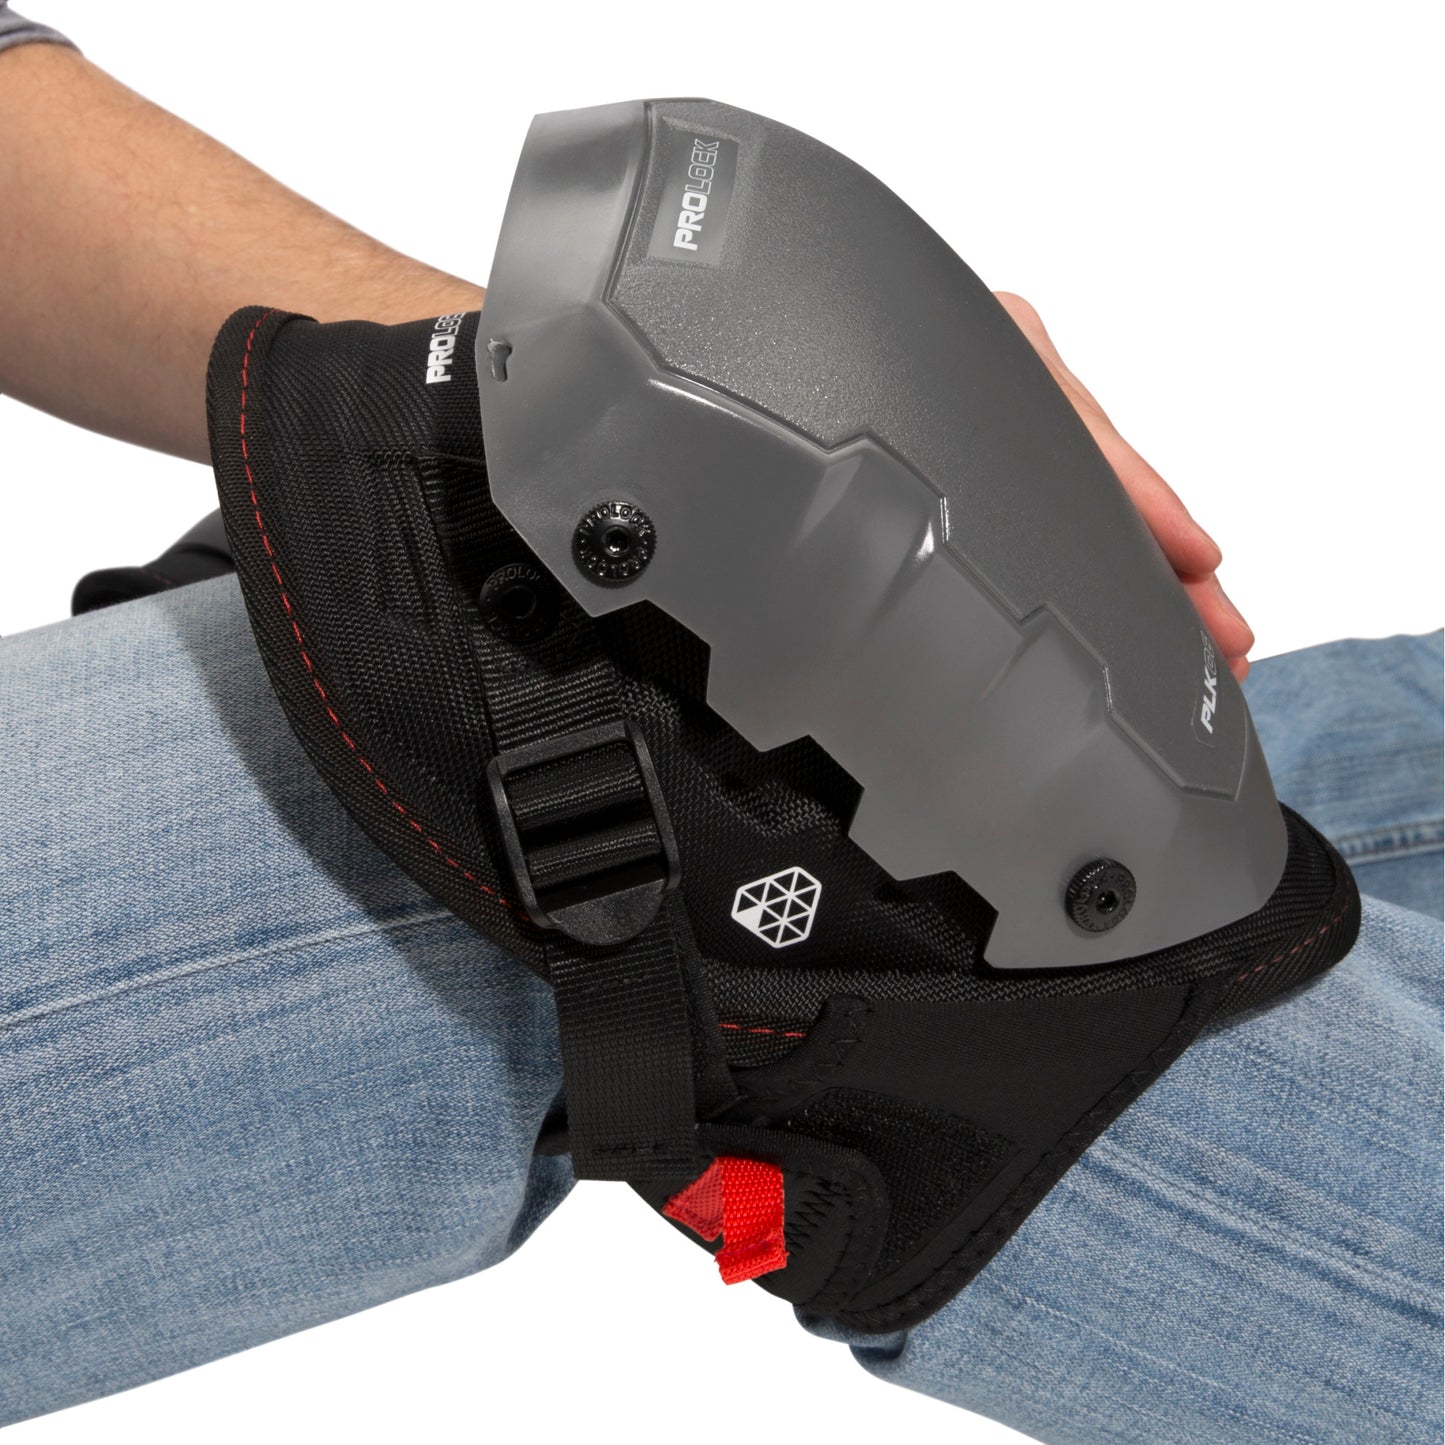 2-Piece Foam Knee Pad and Non-Marring Cap Attachment Combo Pack